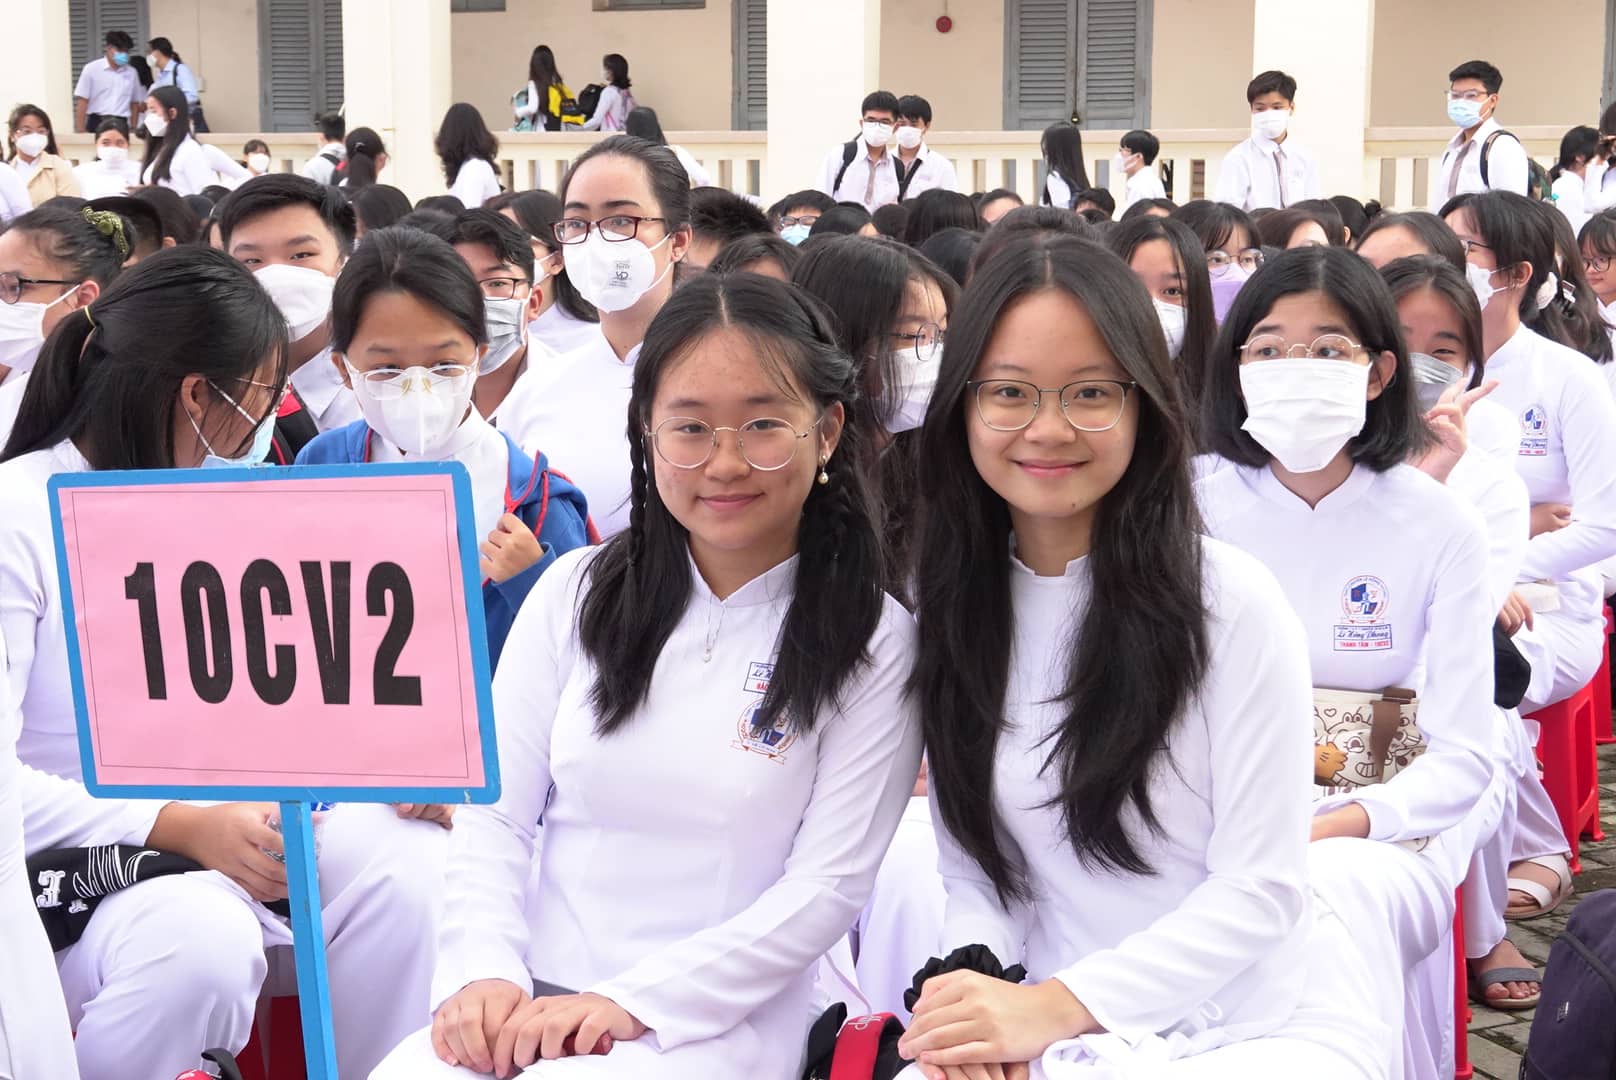 Tenth graders attend the school opening ceremony at Le Hong Phong High School for the Gifted in District 5, September 5, 2022. Photo: Huu Hanh / Tuoi Tre